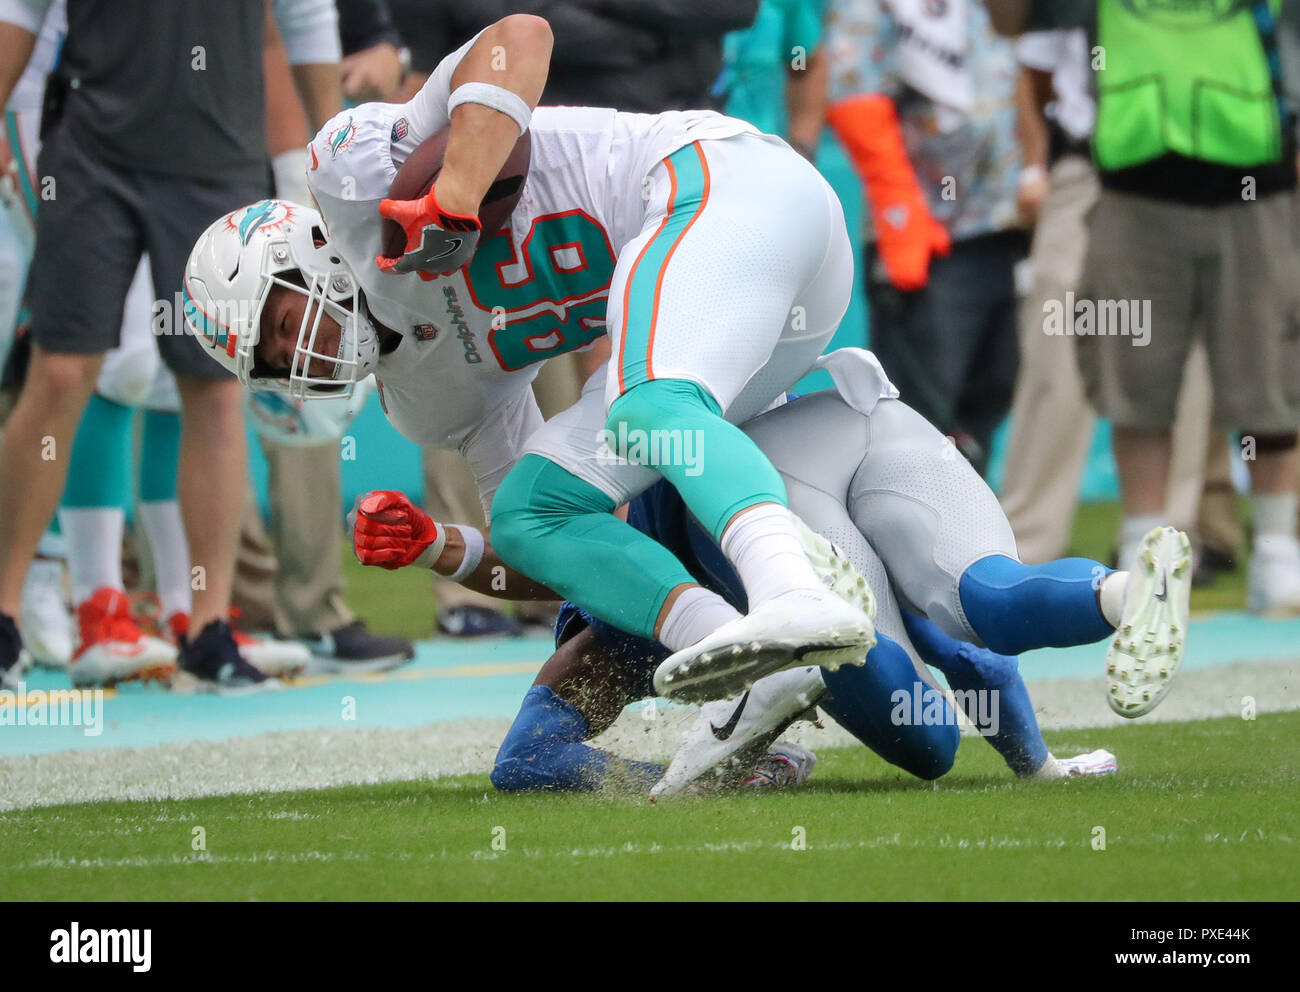 Miami Gardens, Florida, USA. 21st Oct, 2018. Miami Dolphins tight end Mike Gesicki (86) runs with the ball, stopped on the sidelines by Detroit Lions defensive back Tracy Walker (47), during a NFL football game between the Detroit Lions and the Miami Dolphins at the Hard Rock Stadium in Miami Gardens, Florida. Credit: Mario Houben/ZUMA Wire/Alamy Live News Stock Photo